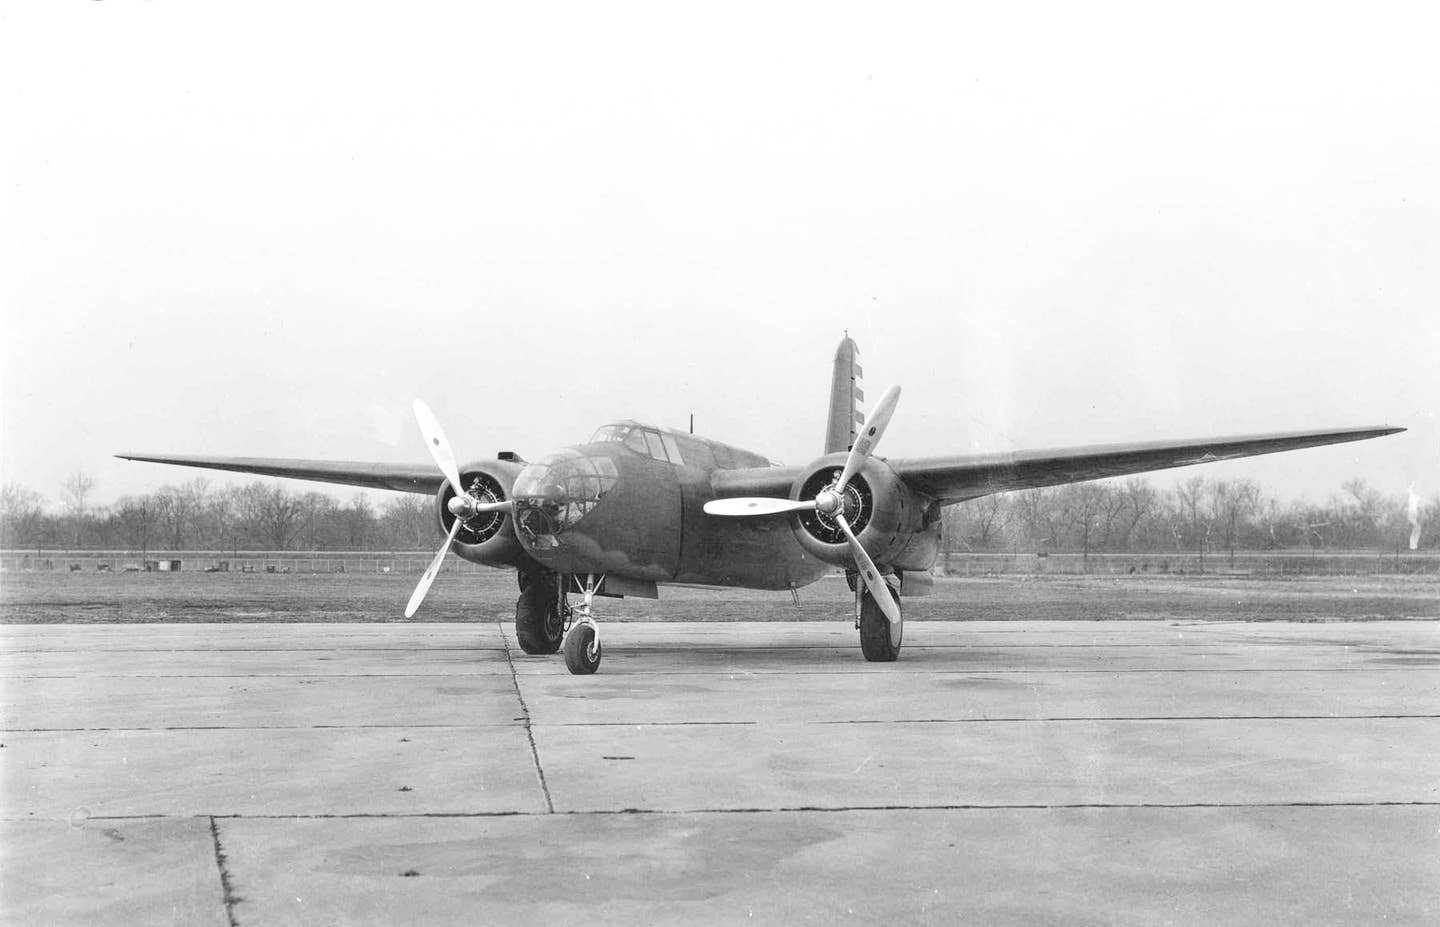 Douglas A-20A Havoc - with a glass nose for a bombardier. (USAF photo)